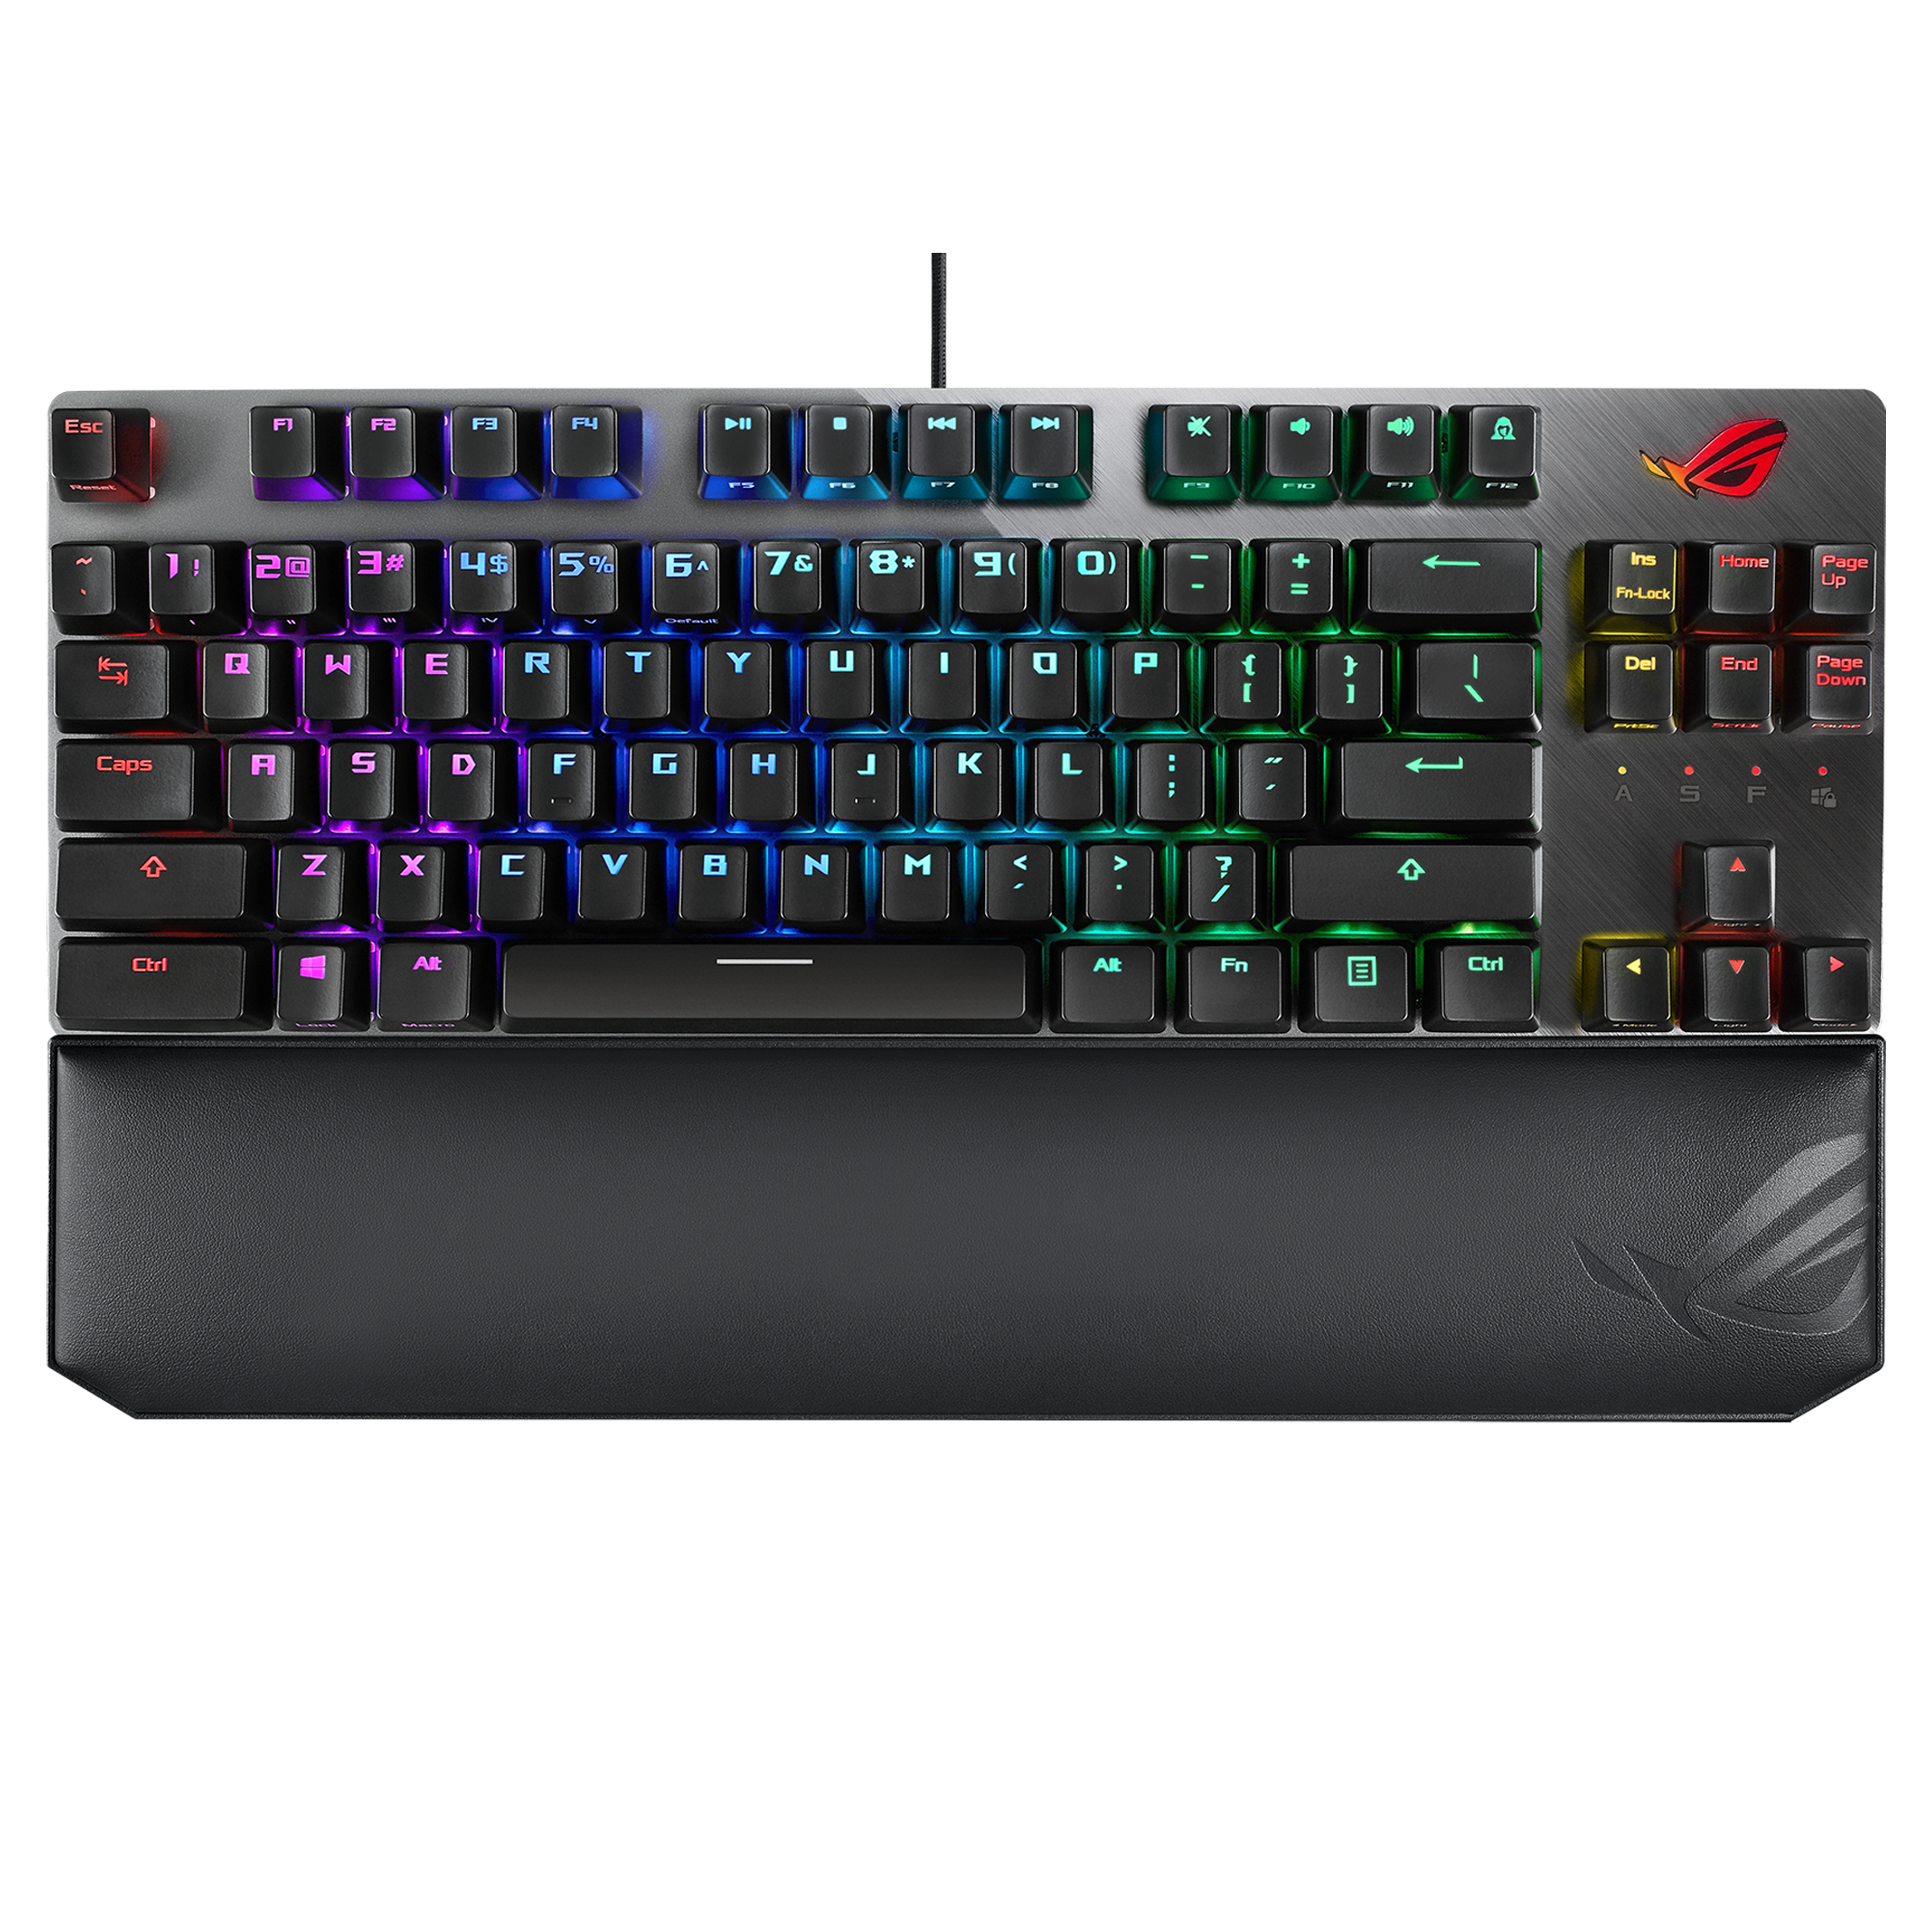 ASUS ROG Strix Scope NX TKL Moonlight White Review (Page 2 of 3)